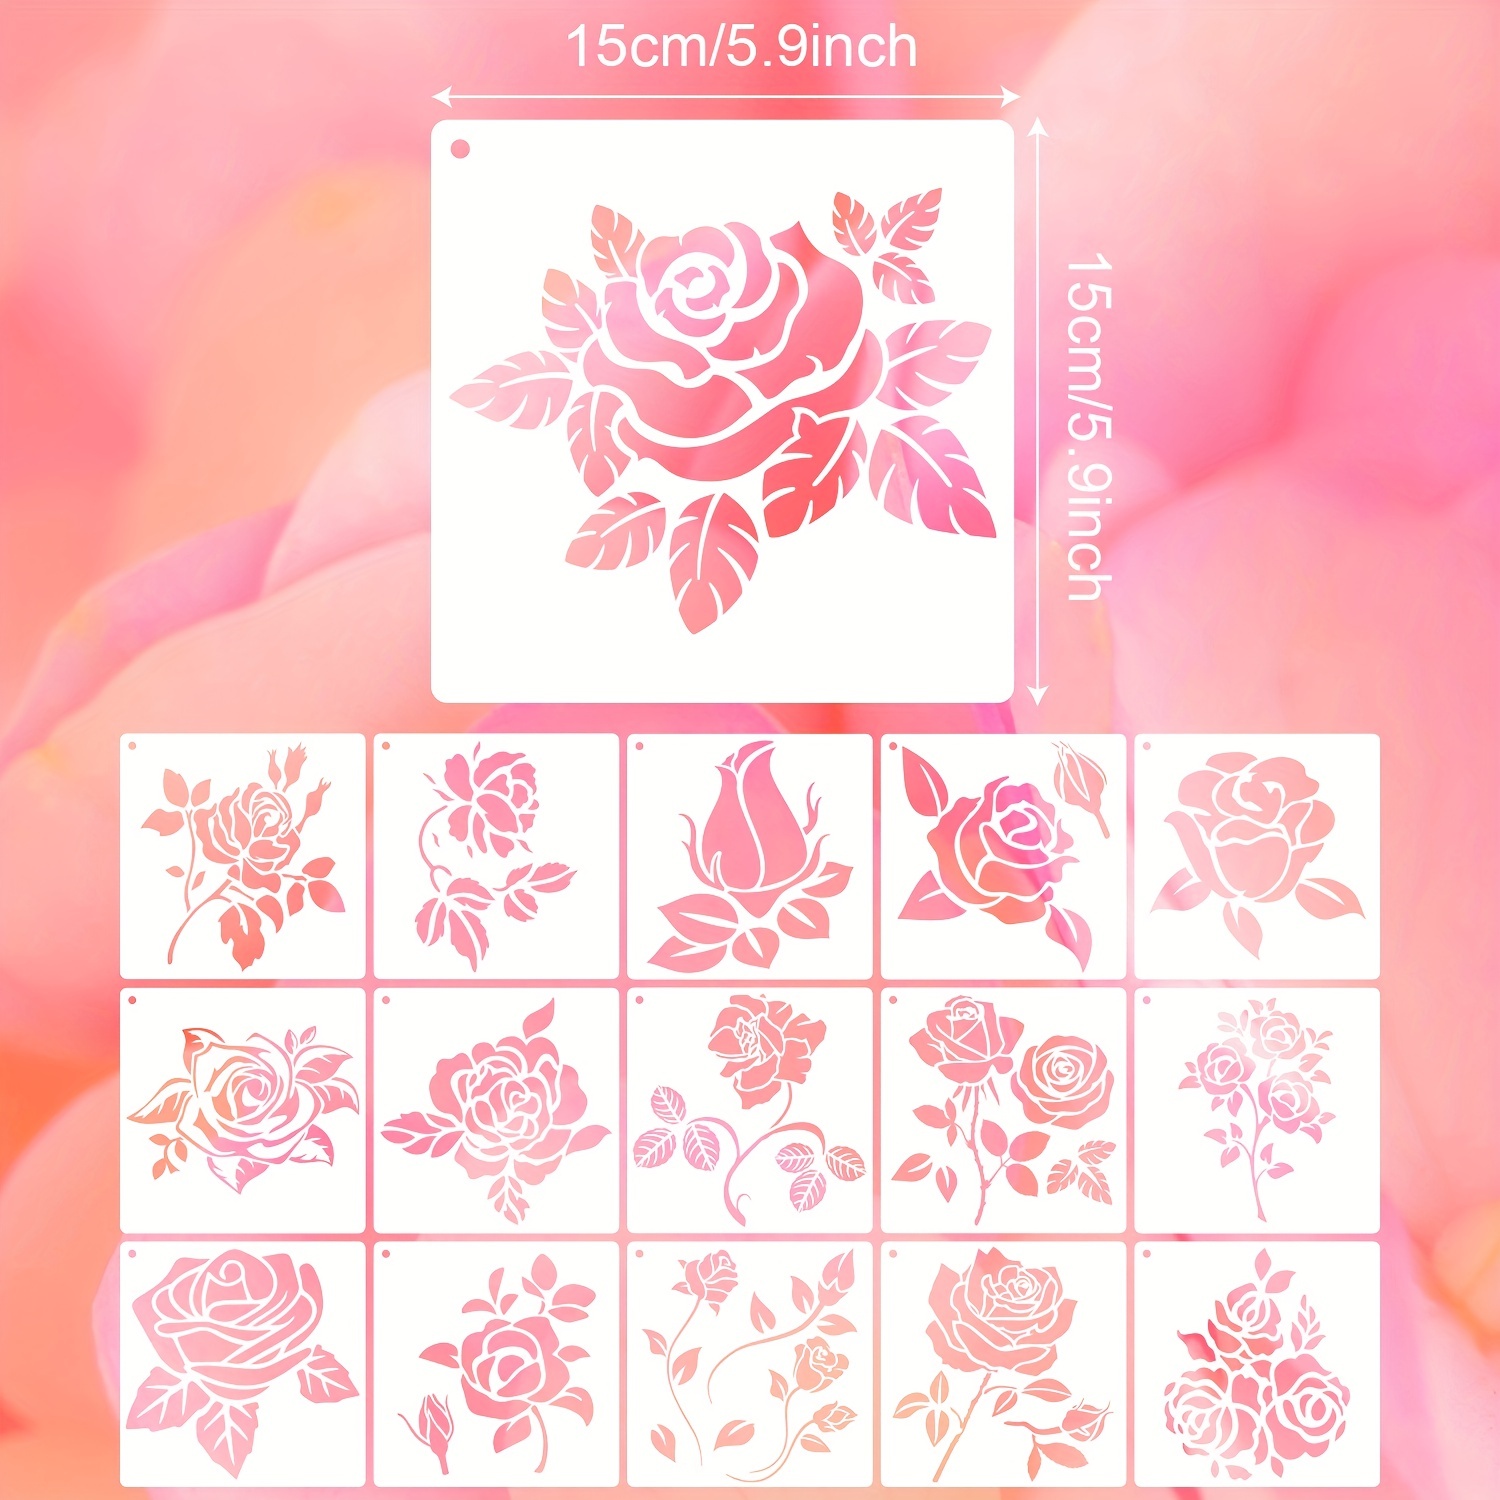 Stencils for Painting on Wood,Wall Home Decor,15x15cm Rose Flower Texture  DIY Reusable Stencils Art Templates for Painting on Wood,Wall